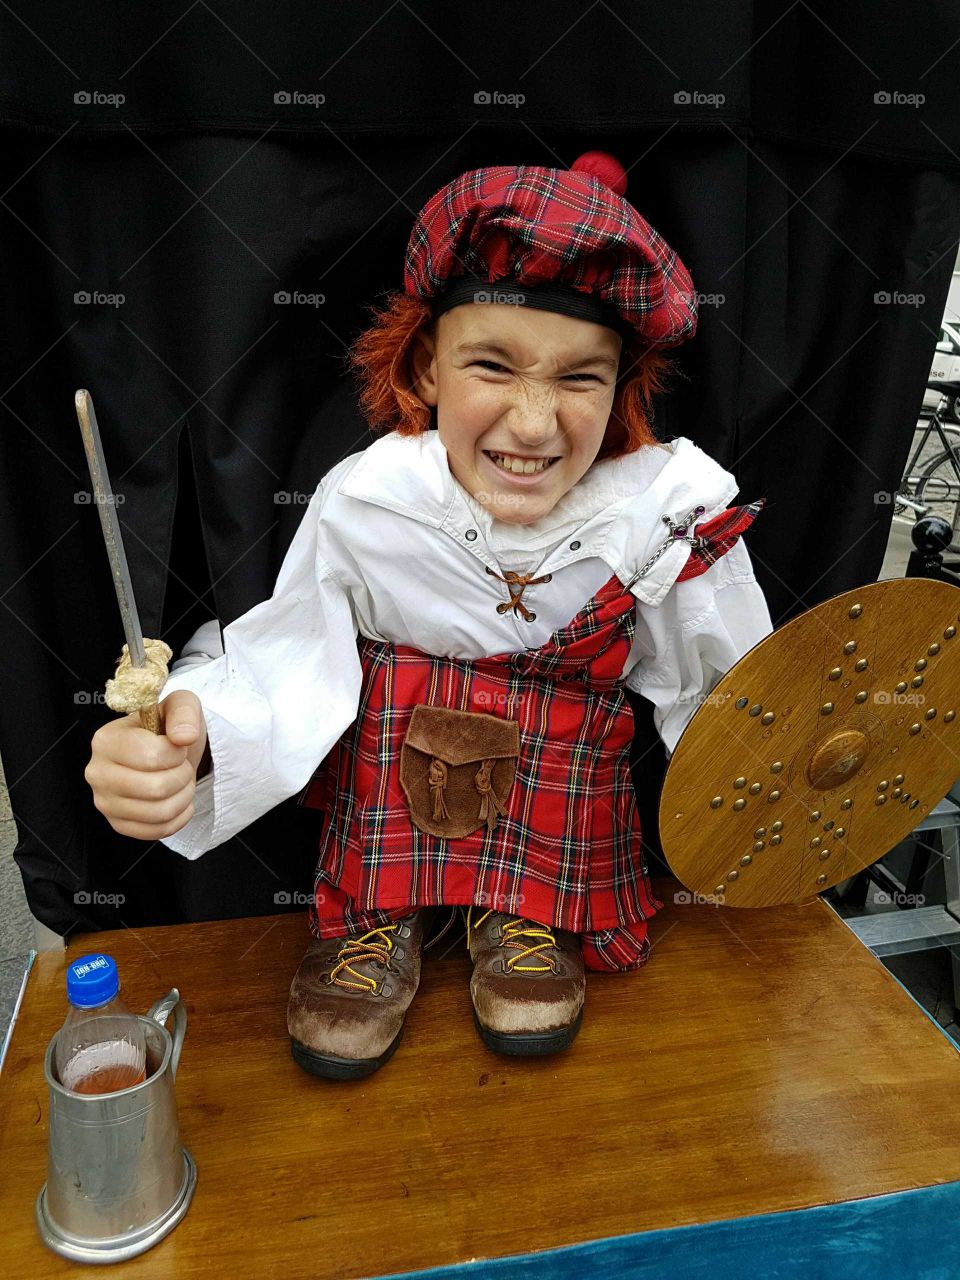 A wee Scotsman!!